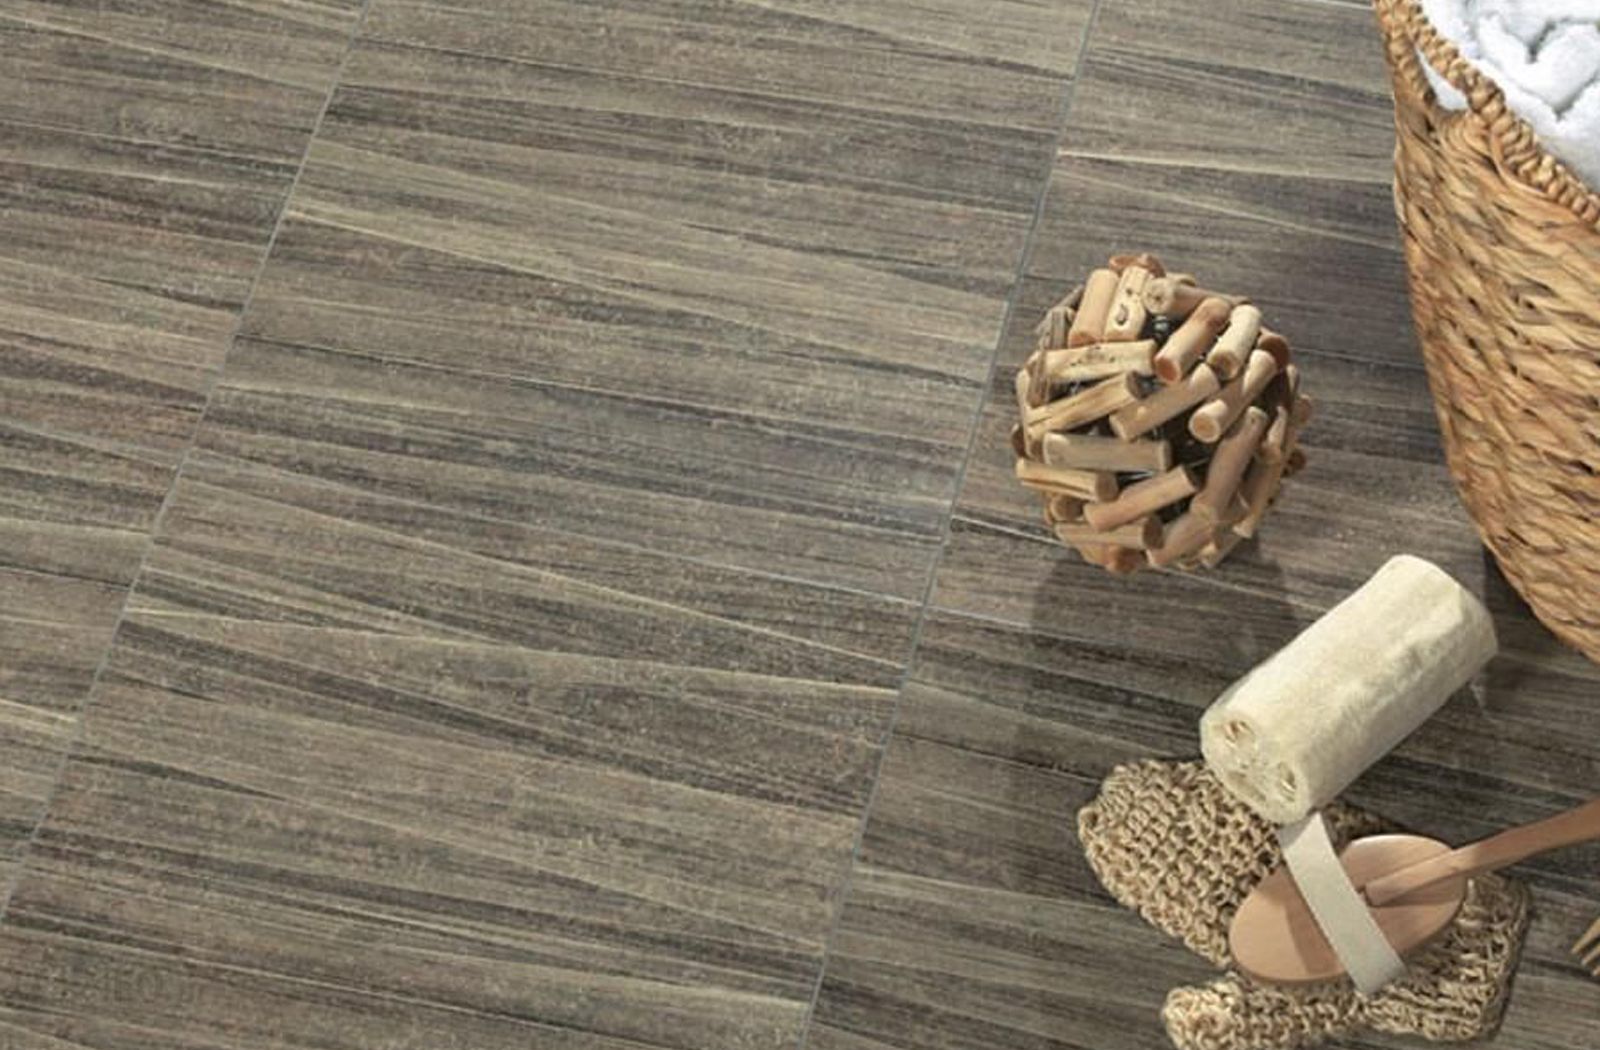 Norsk Norsk By Baldocer Is A Glazed Porcelain Tile Collection That Features Diagonal Lines Running Across